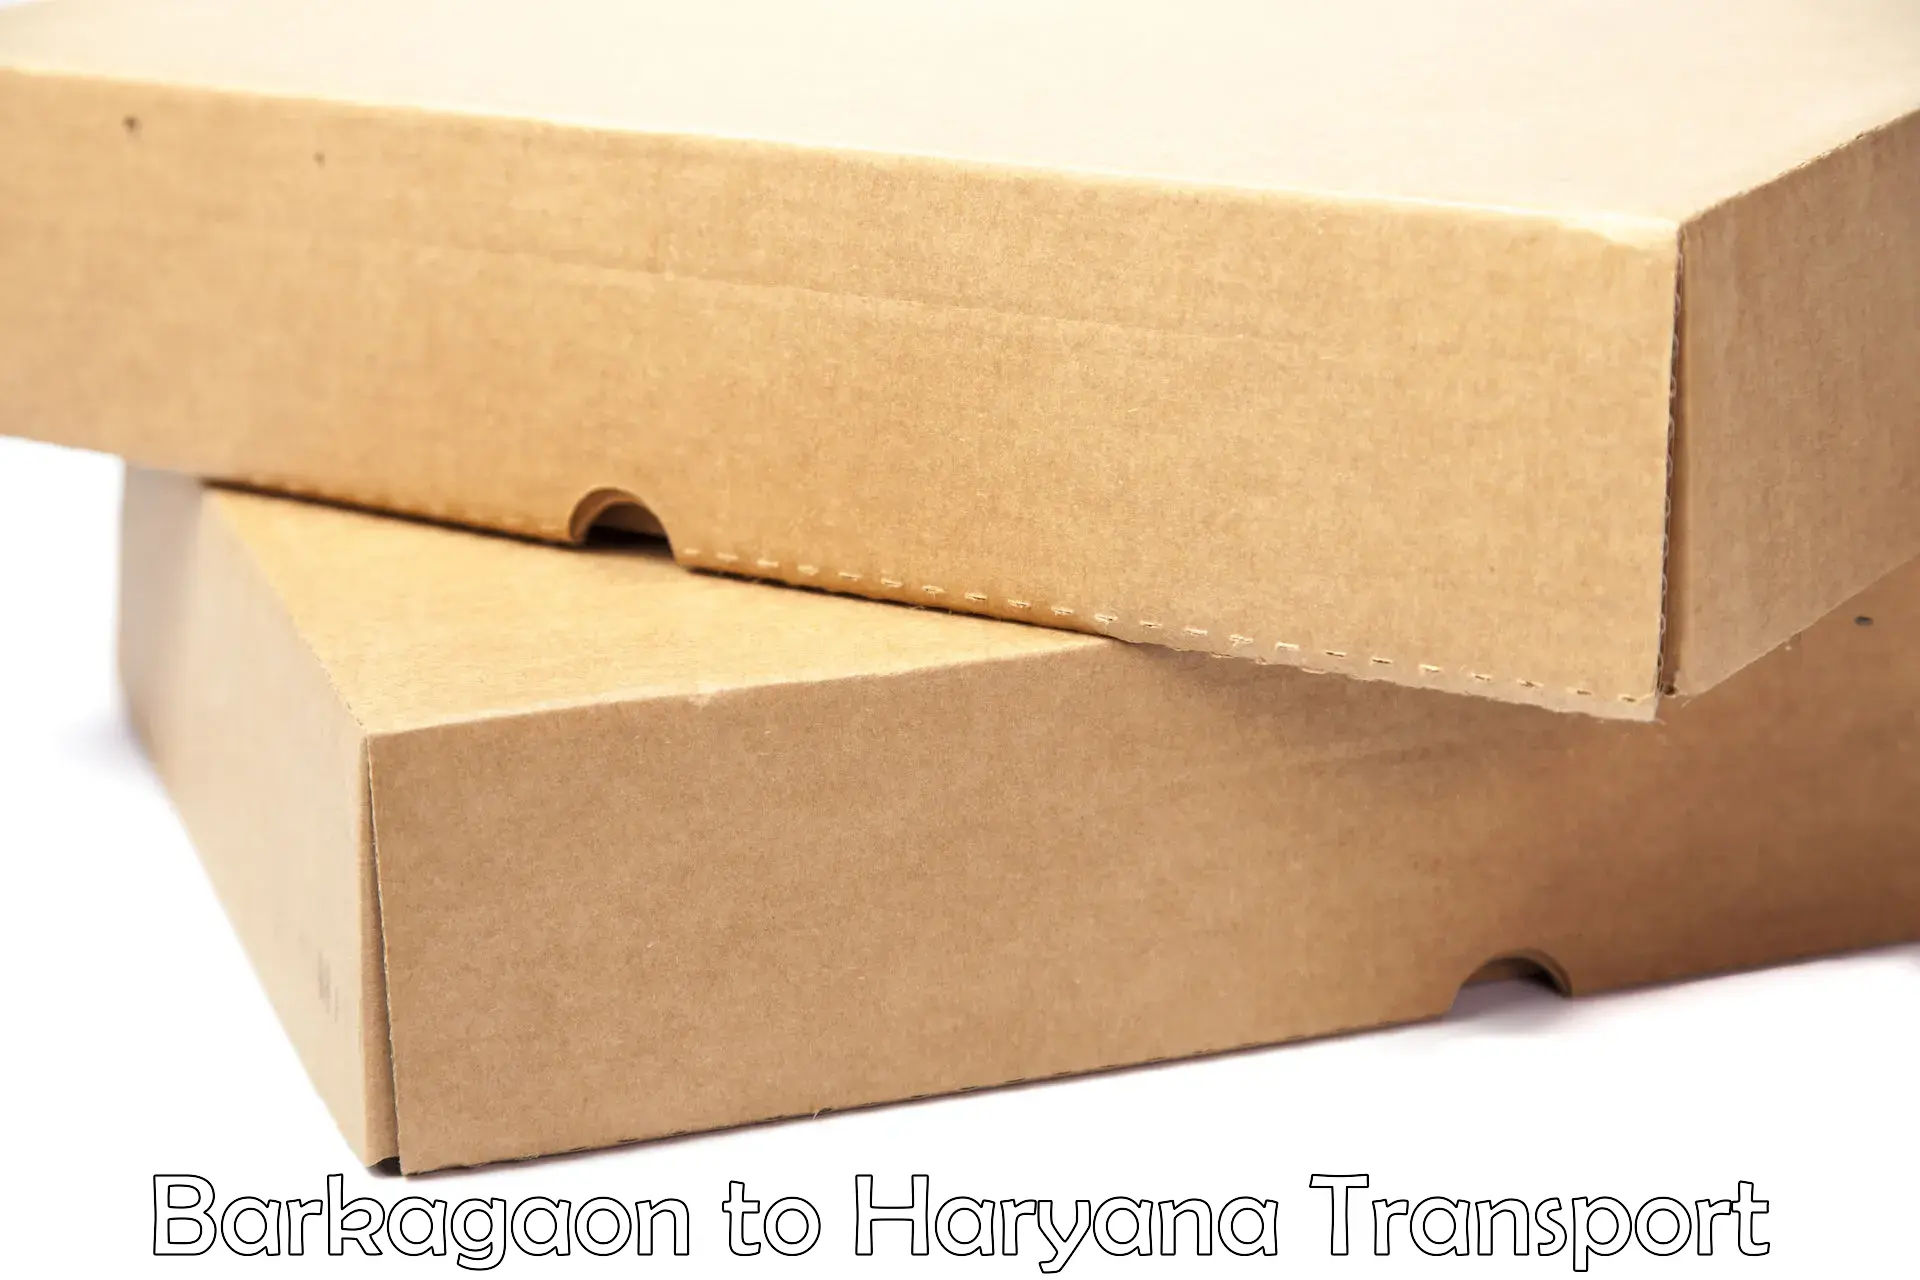 Daily parcel service transport Barkagaon to Gurgaon